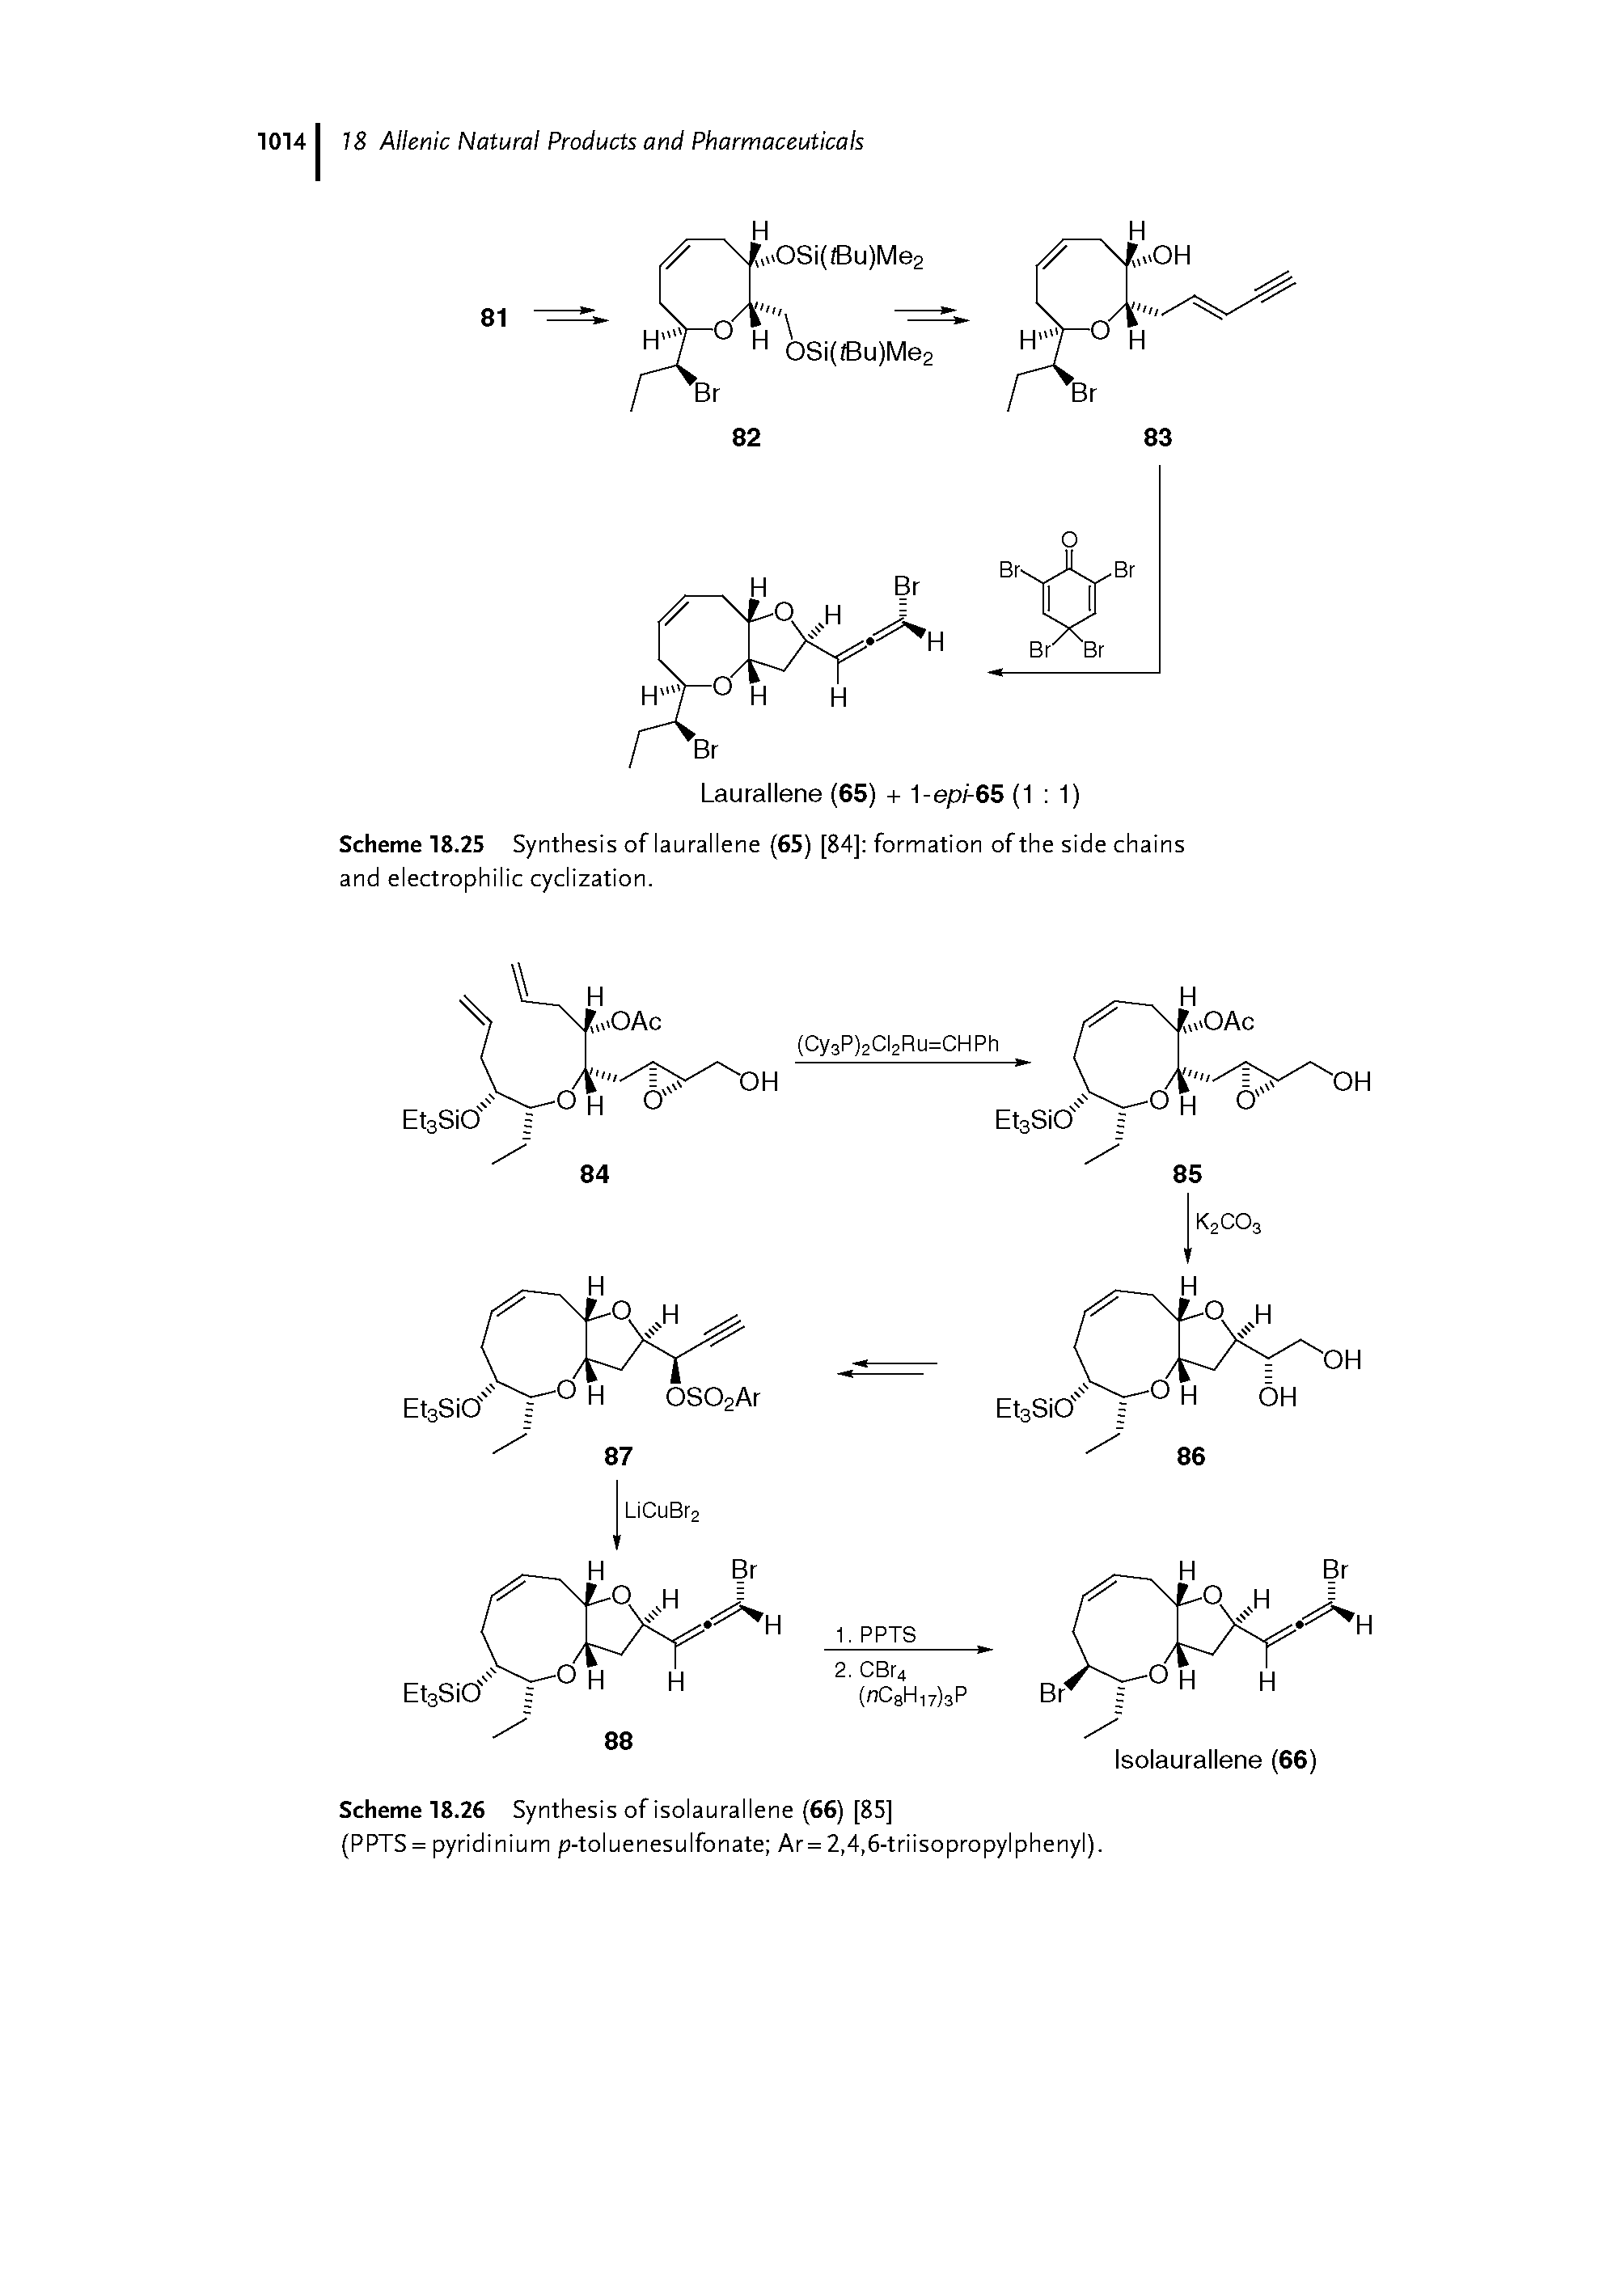 Scheme 18.25 Synthesis of laurallene (65) [84] formation of the side chains and electrophilic cyclization.